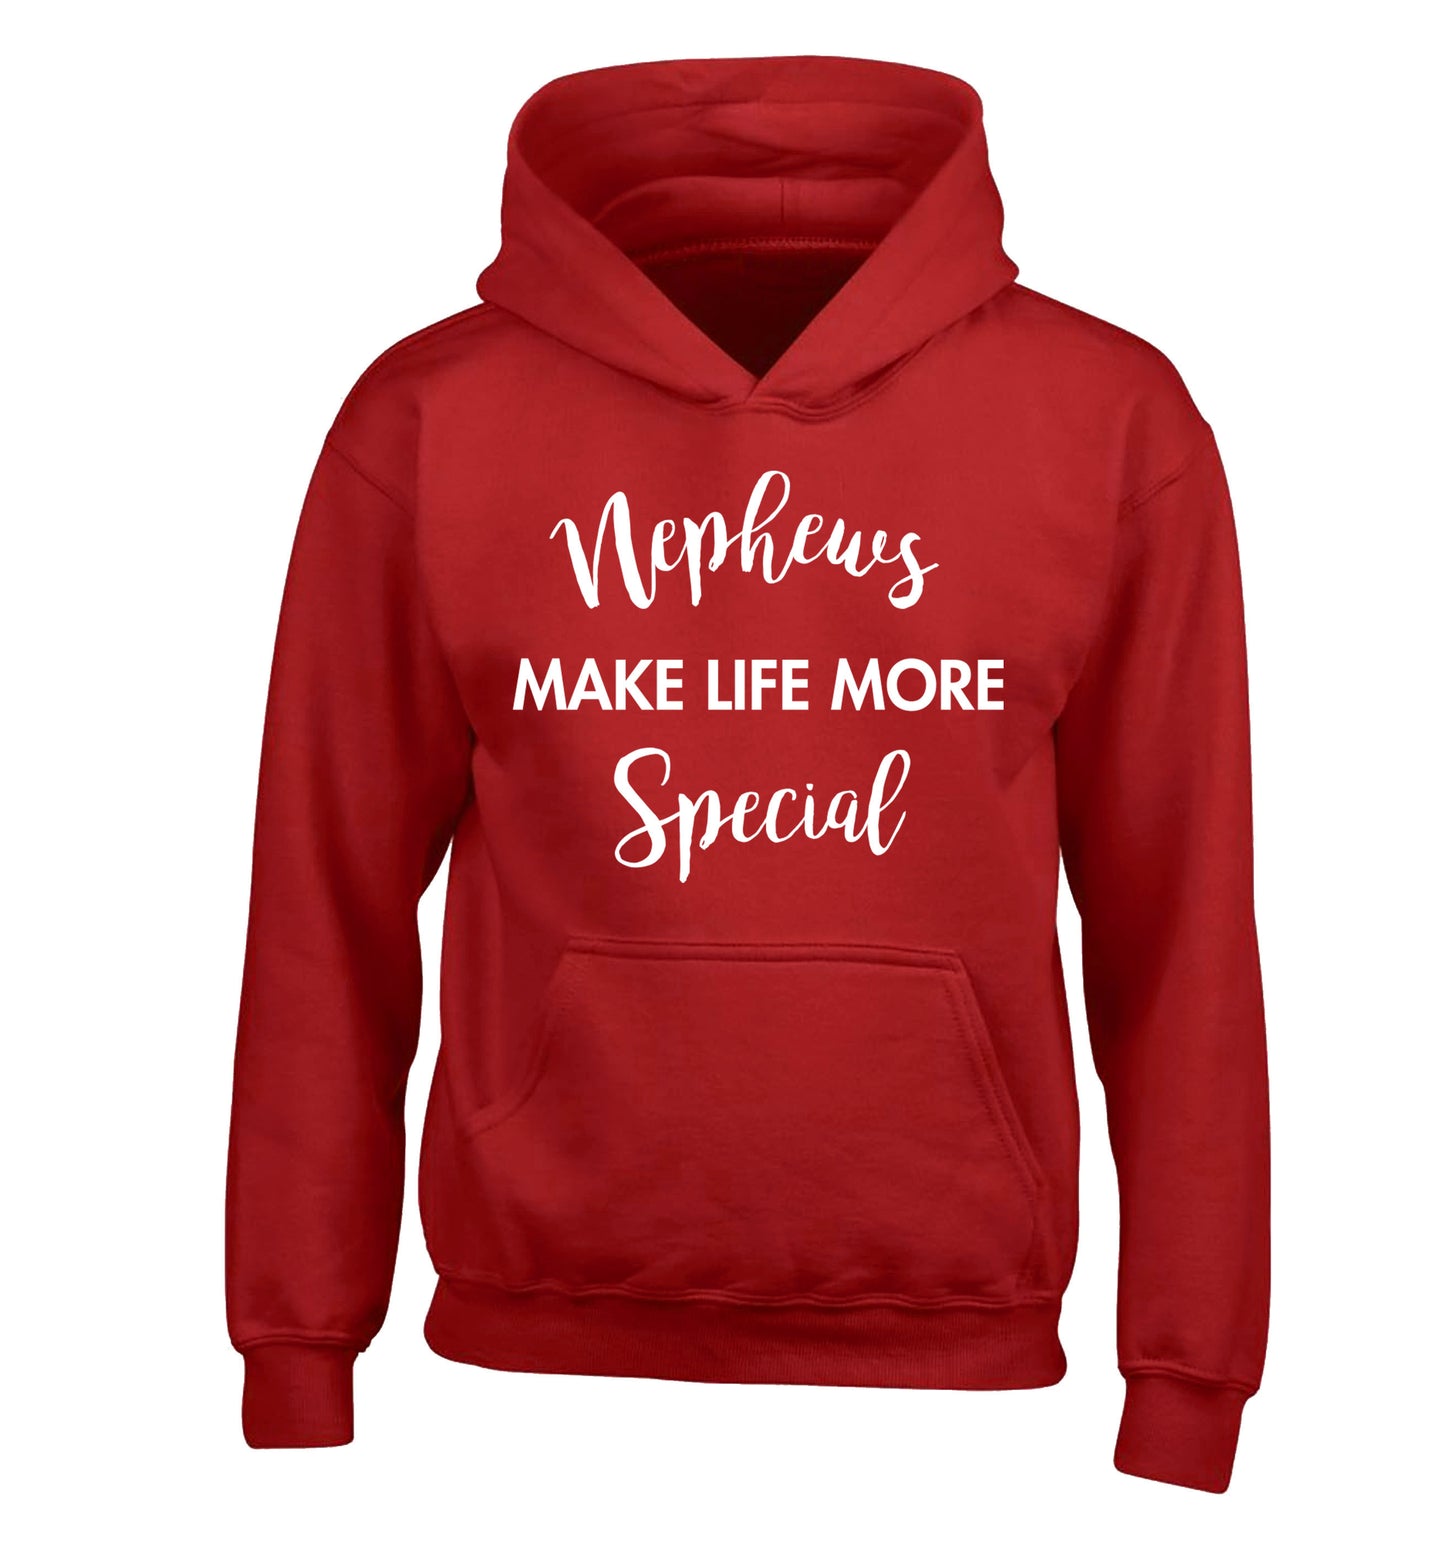 Nephews make life more special children's red hoodie 12-14 Years